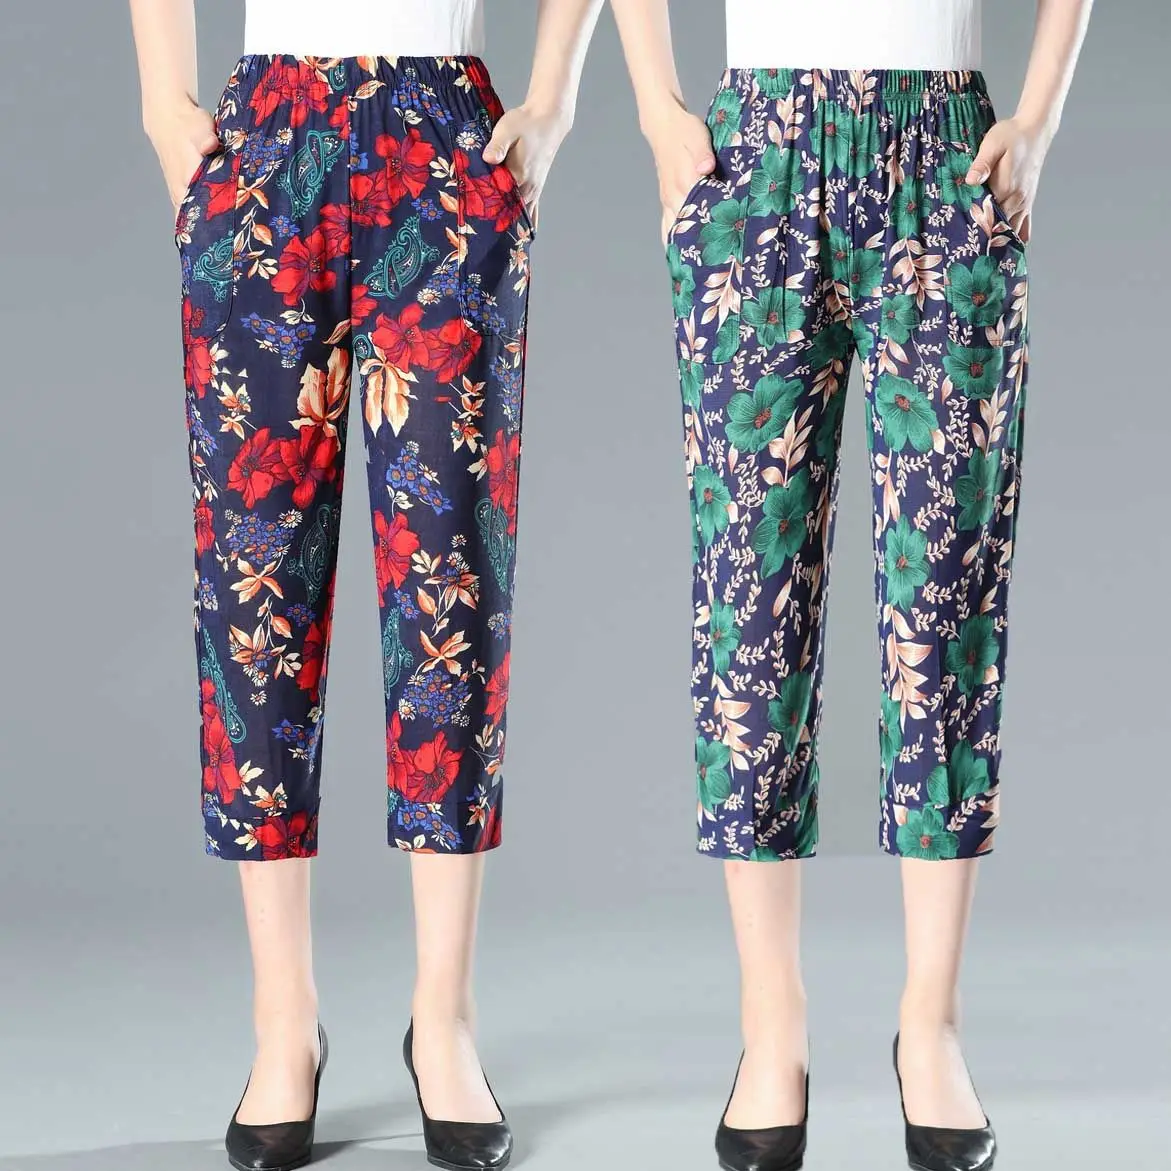 

Summer Middle-aged And Elderly Women's Cropped Pants,High Waisted Elastic Mother's Casual Floral Printed Trousers 3XL